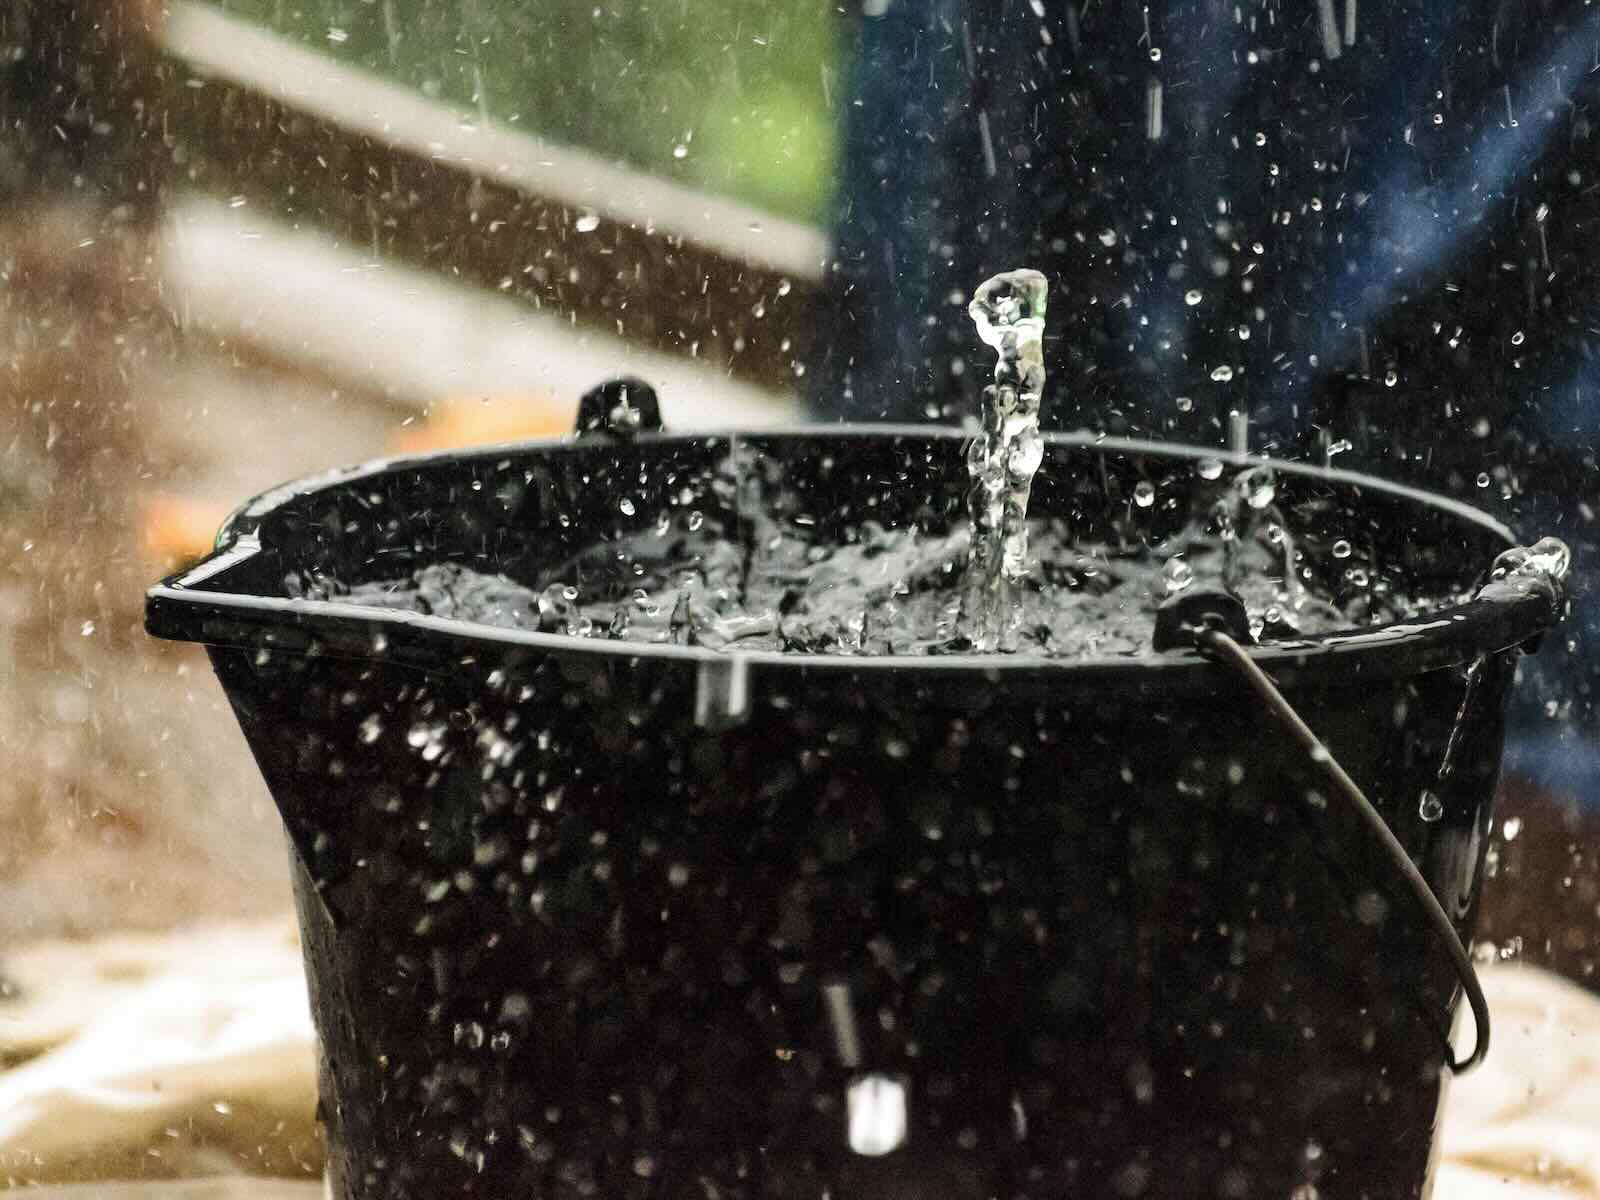 How To Store Rainwater For Drinking